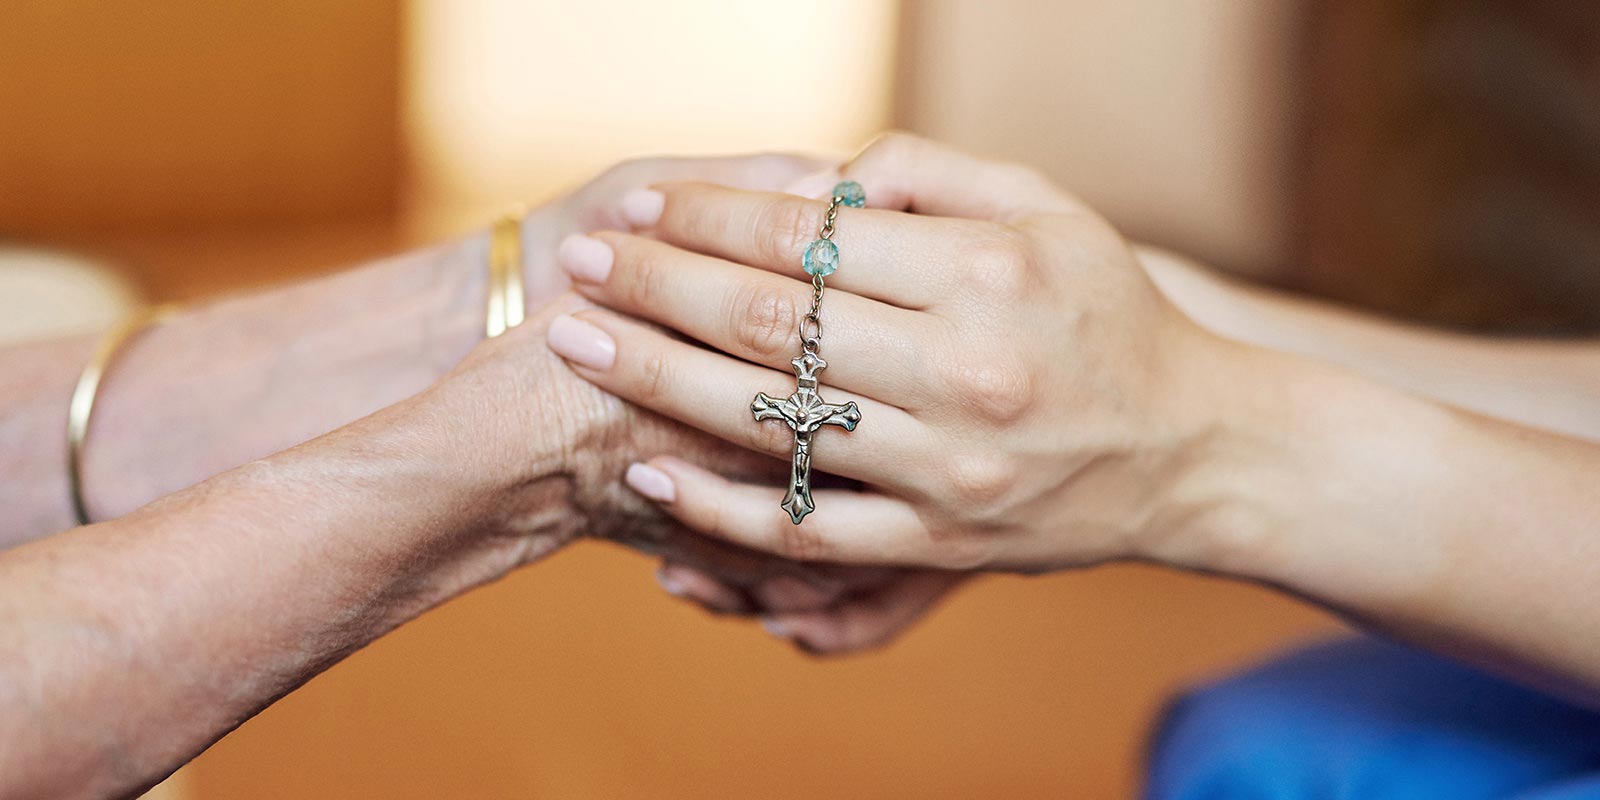 Holding hands with rosary